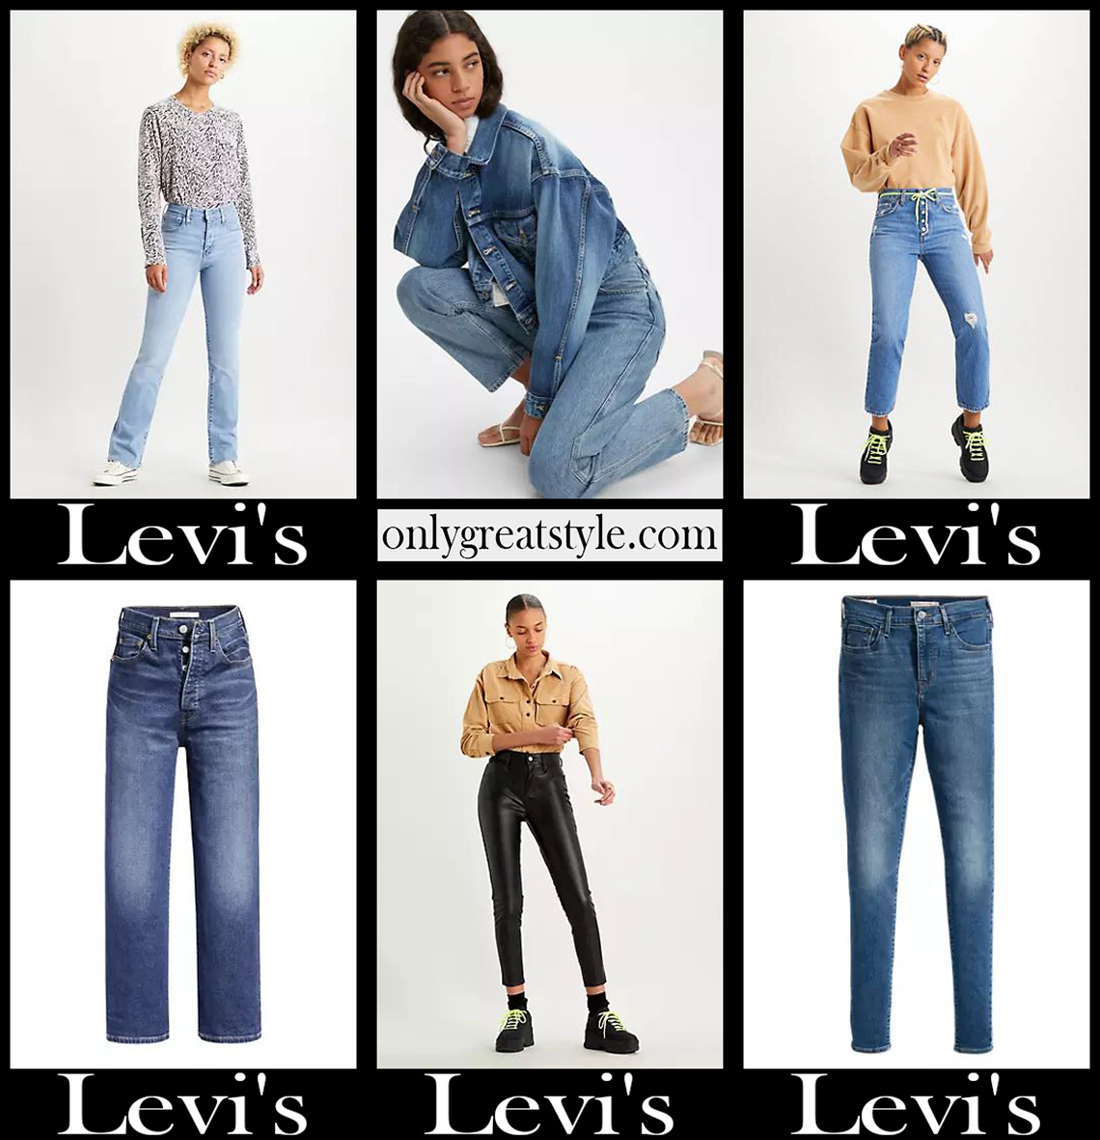 levis new women's collection